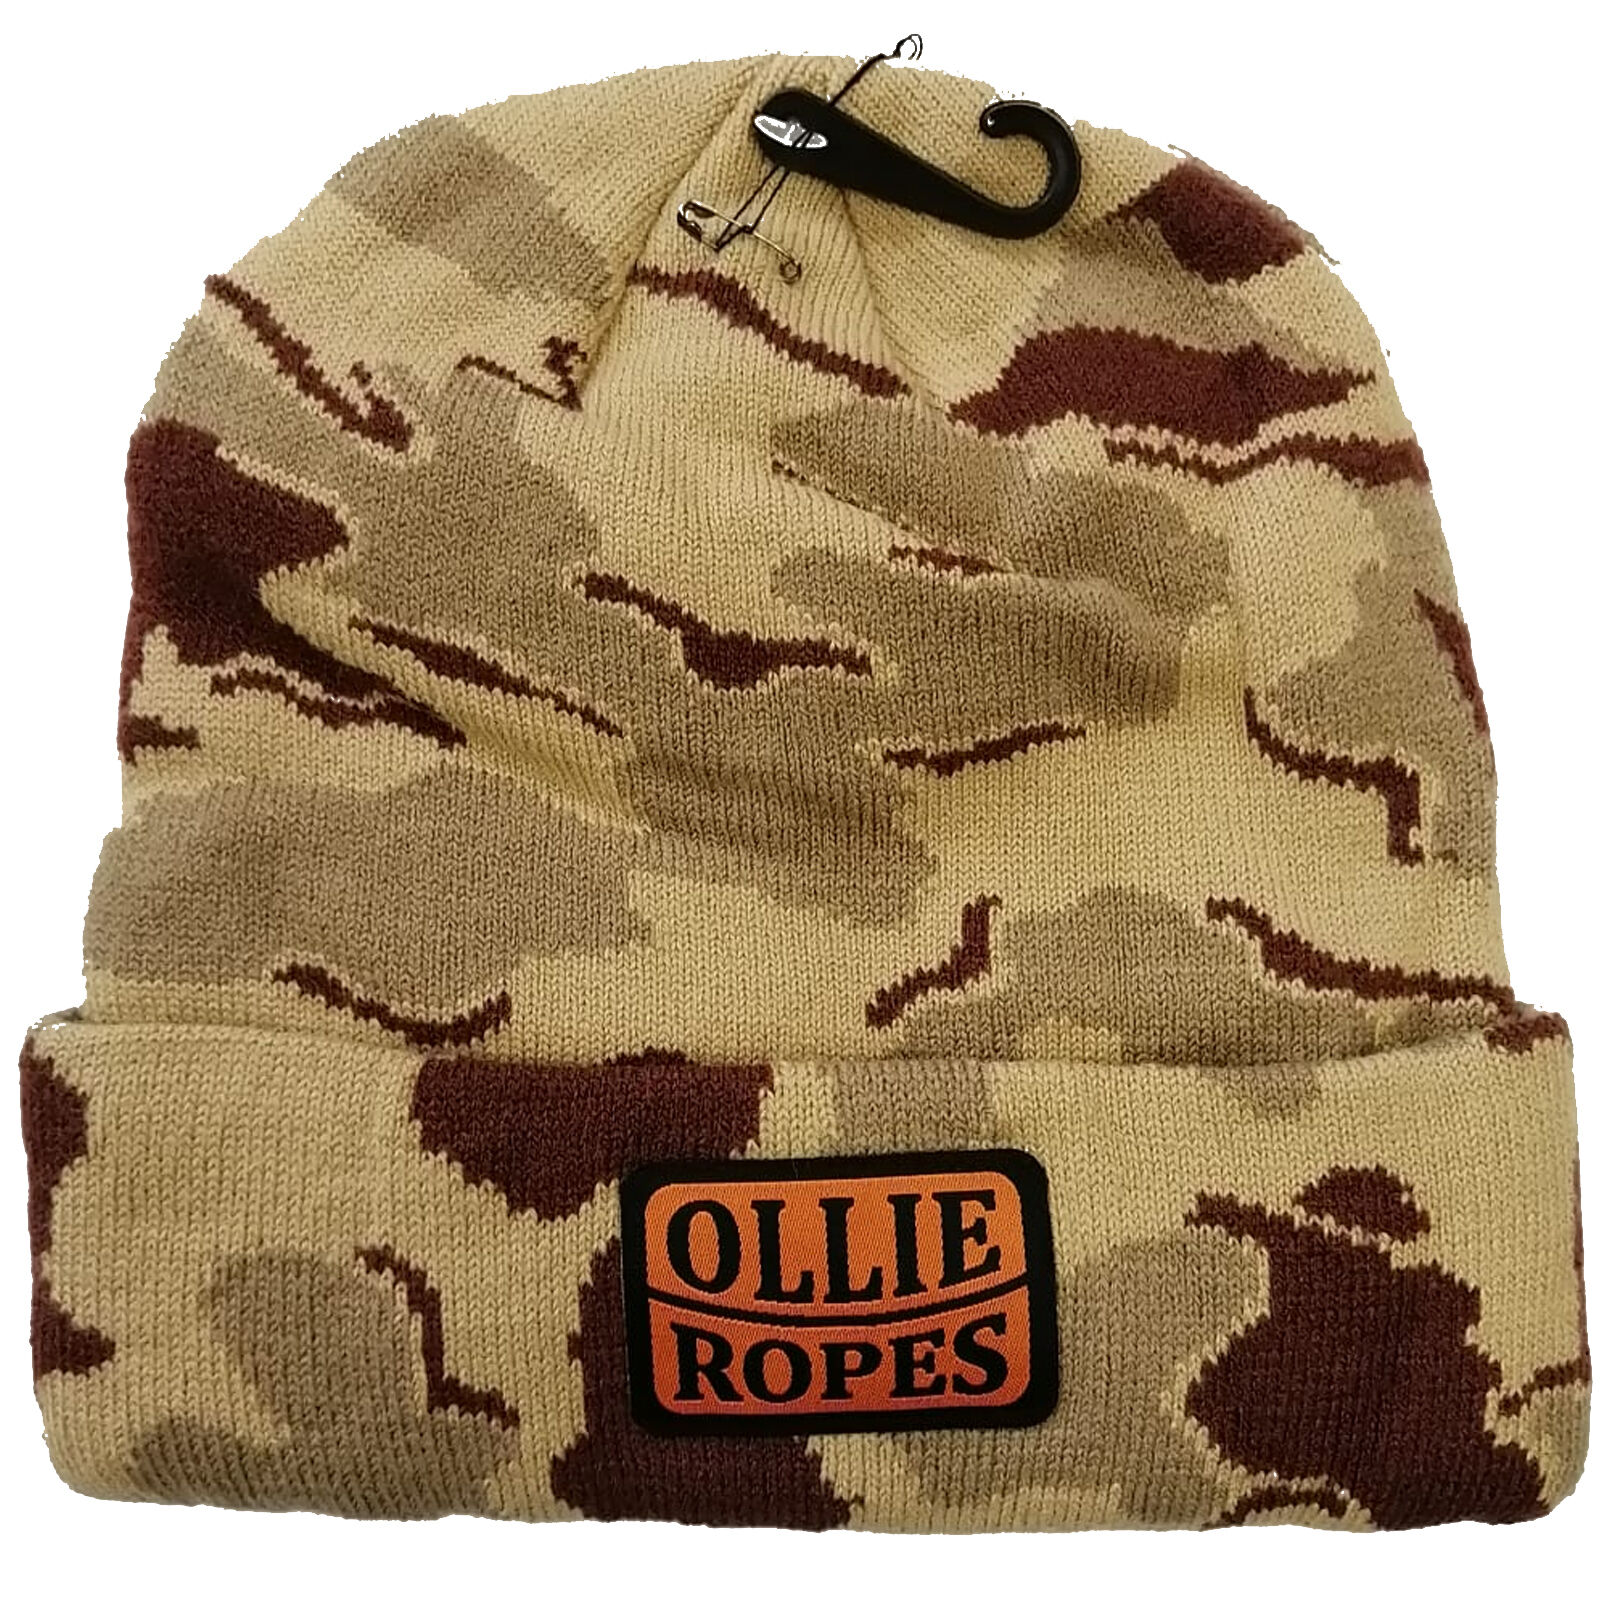 ROME OLLIE ROPES CAMO One Size